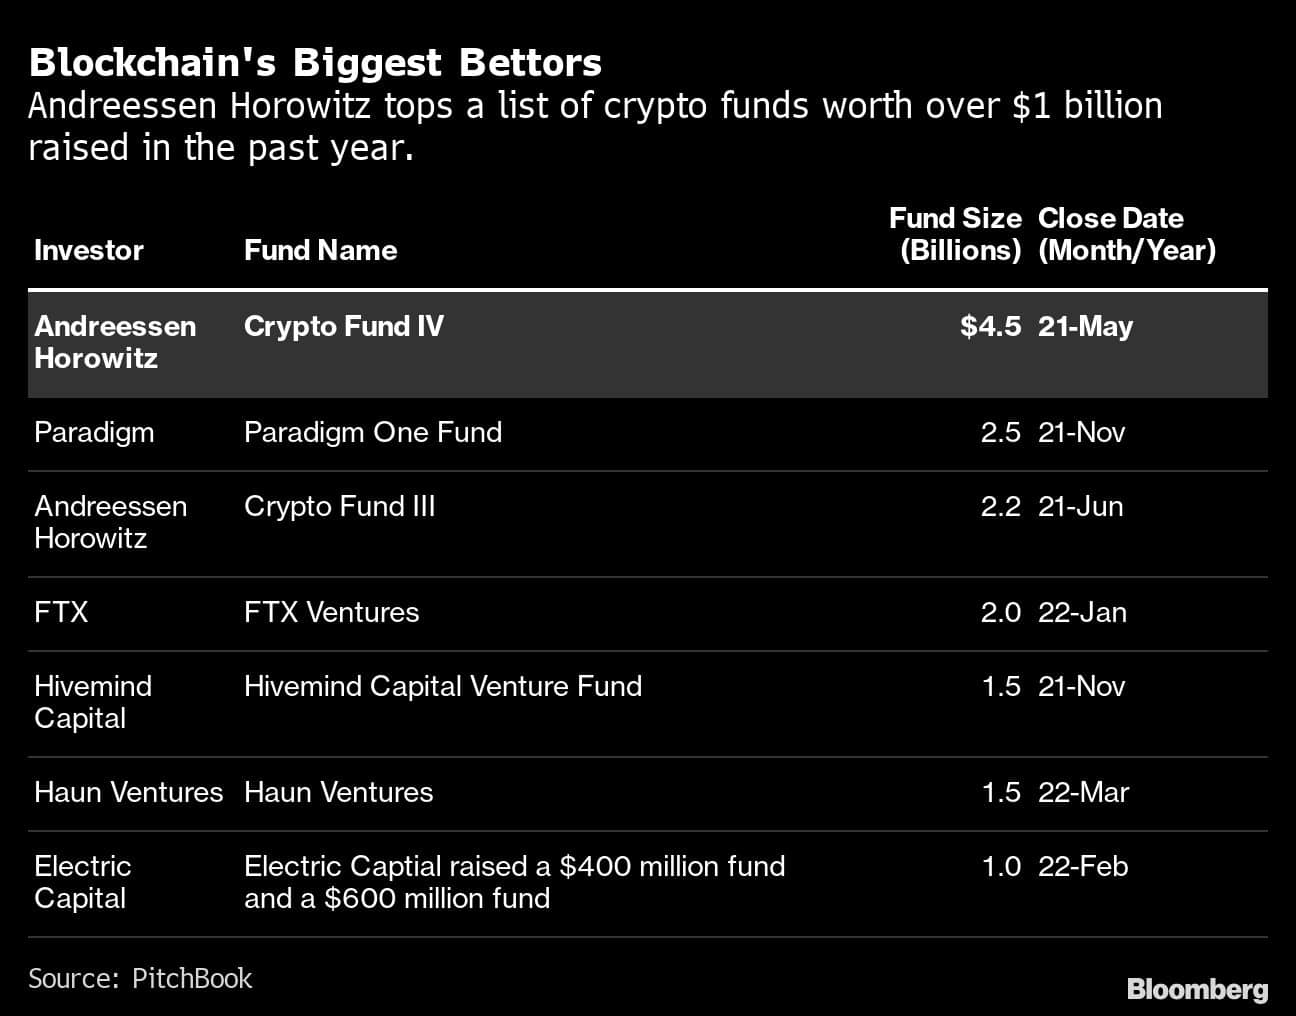 Blockchain's Biggest Bettors | Andreessen Horowitz tops a list of crypto funds worth over $1 billion raised in the past year.